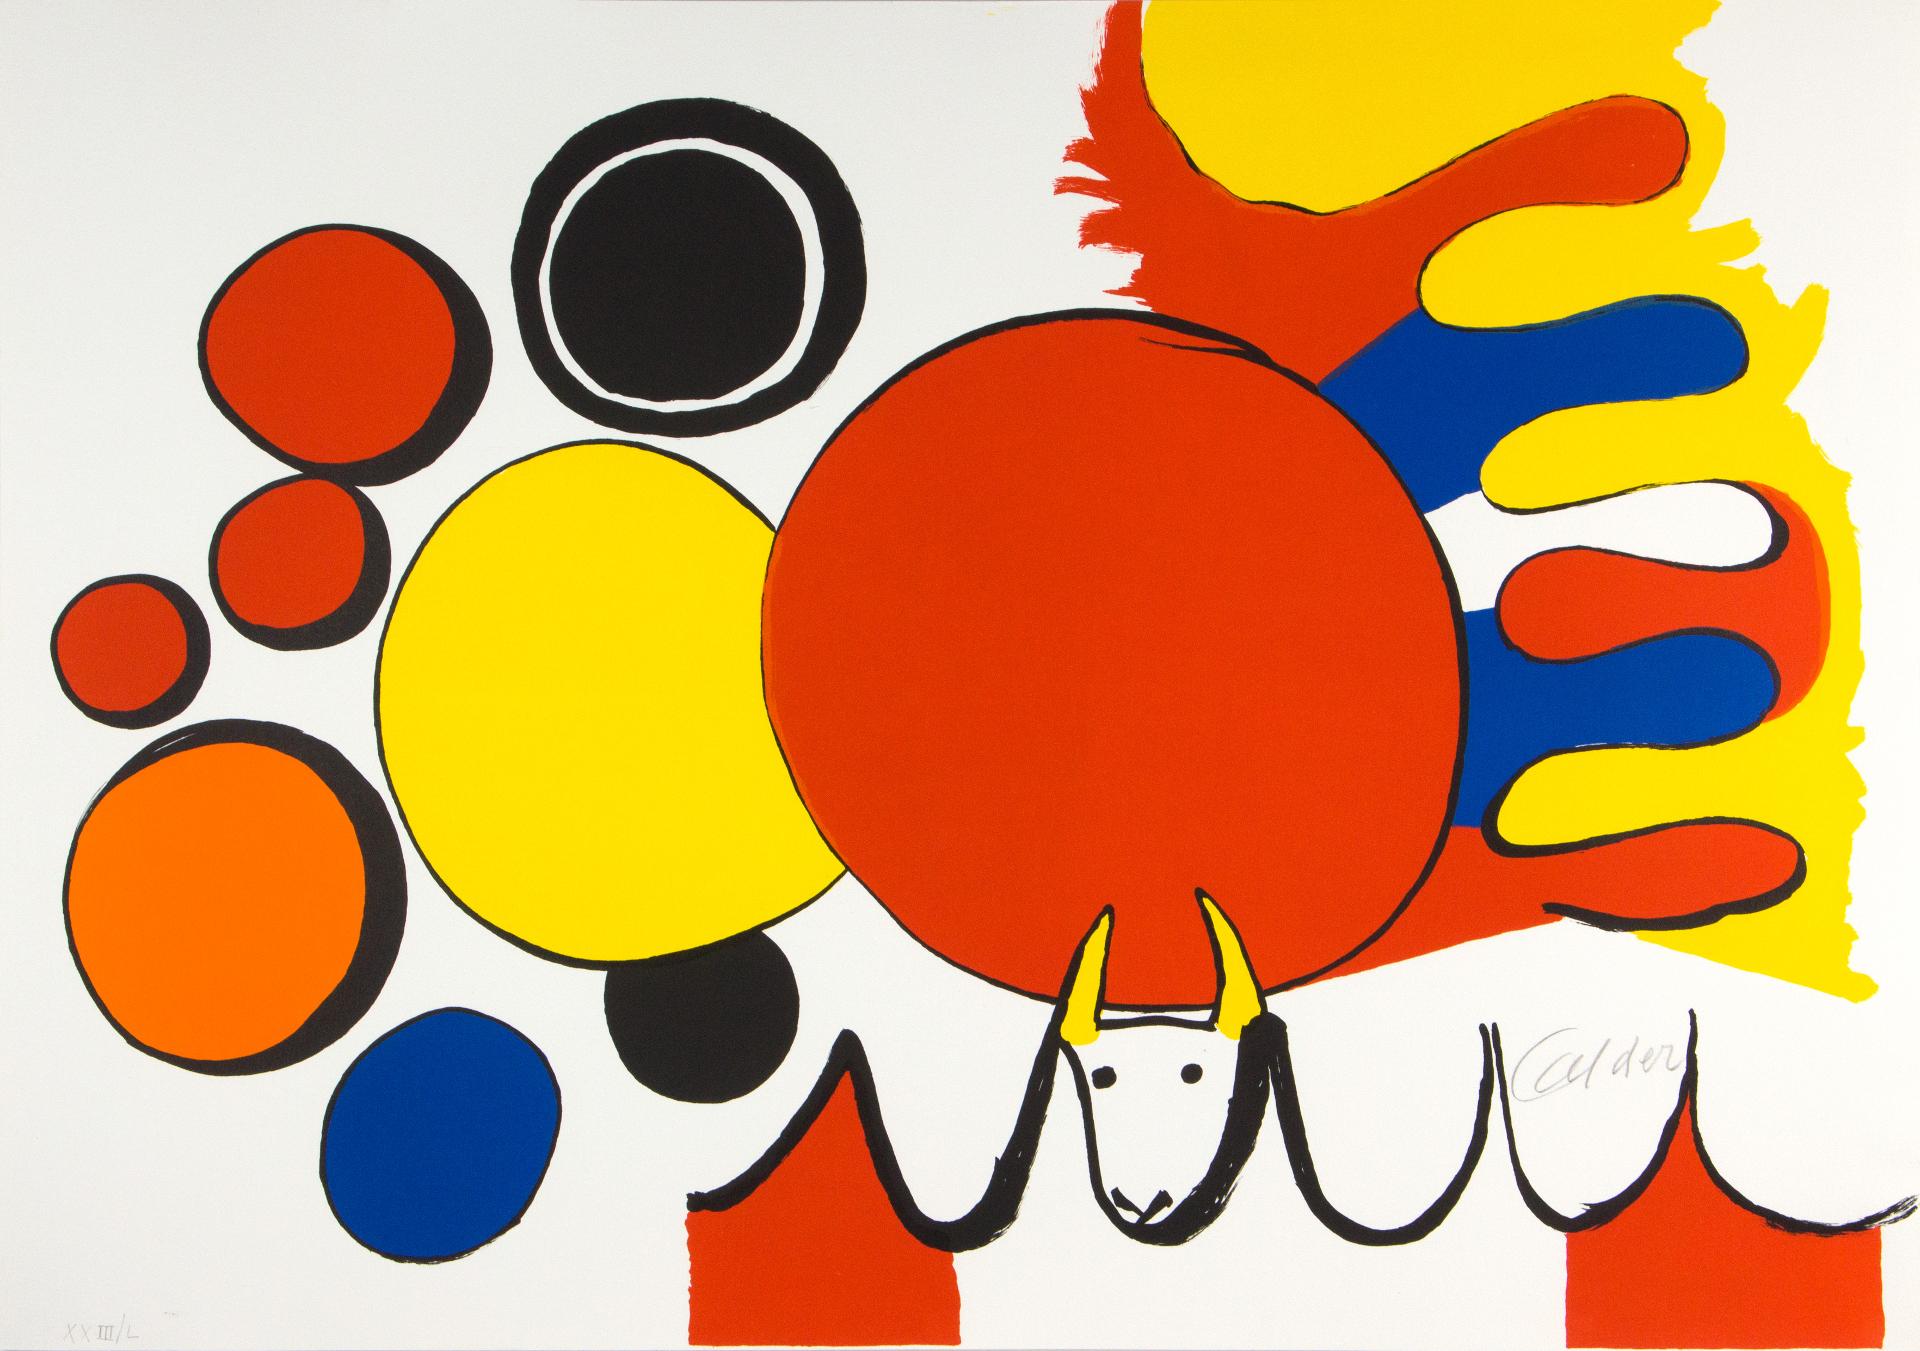 Alexander Calder (1898-1976) - Bull and Circles (from Poems to Watch), 1976